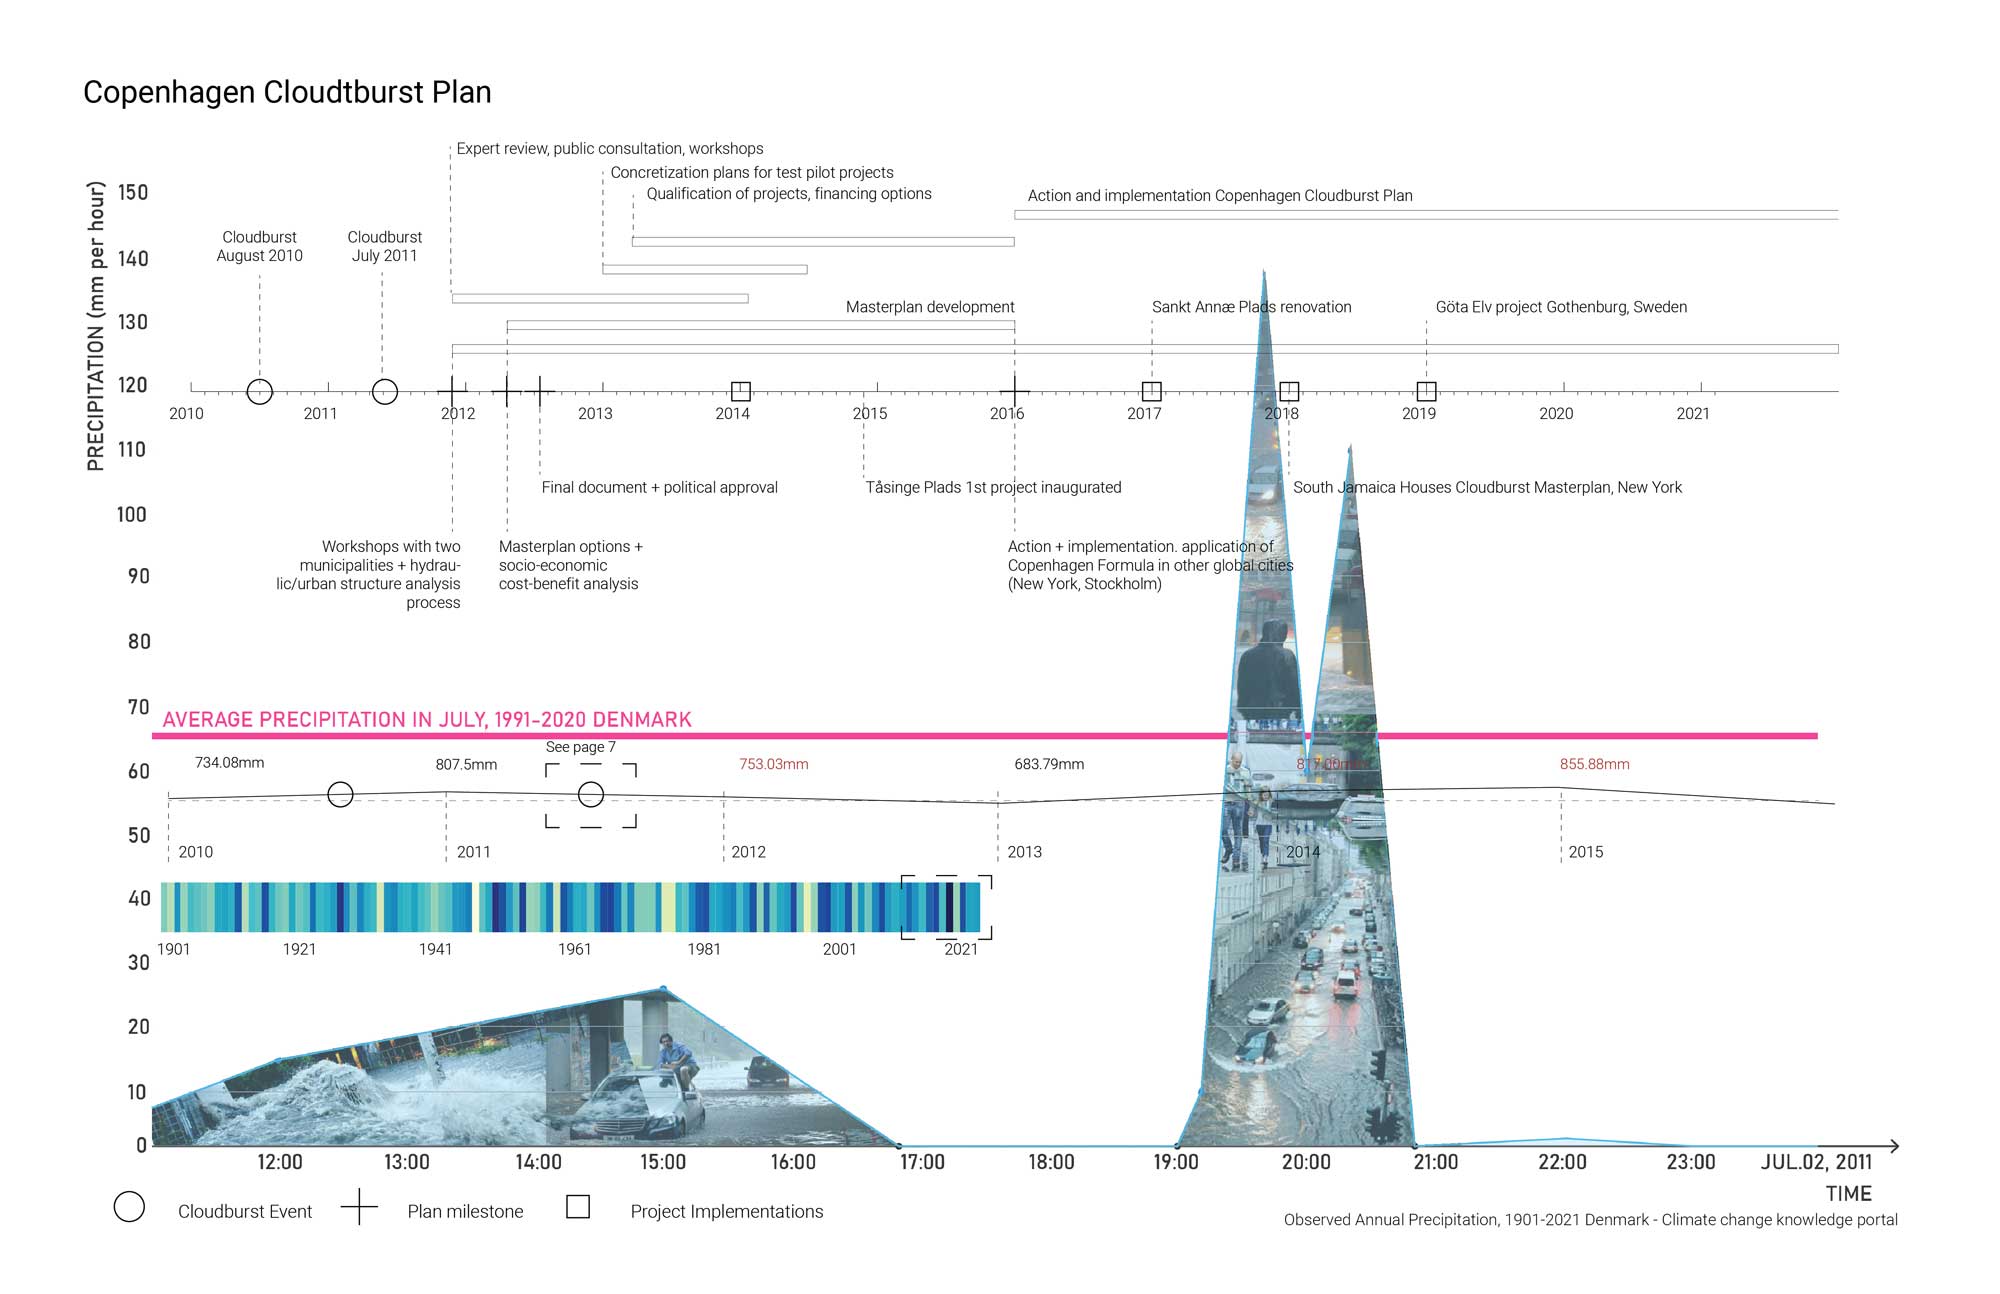 A chart showing data related to average precipitation in Copenhagen included flood events.